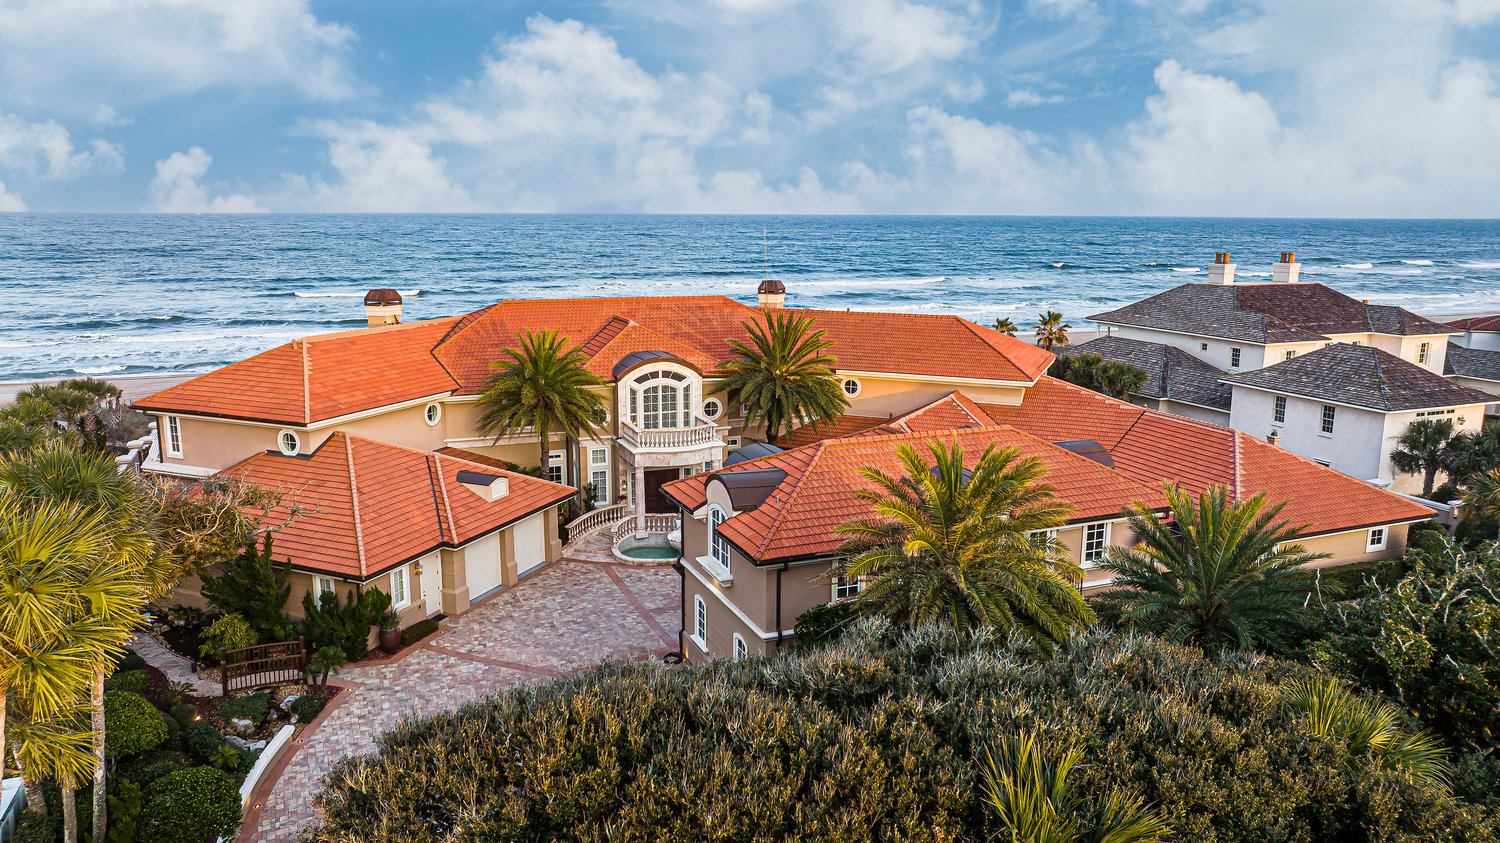 The house at 1201 Ponte Vedra Blvd. is a magnificent oceanside estate.